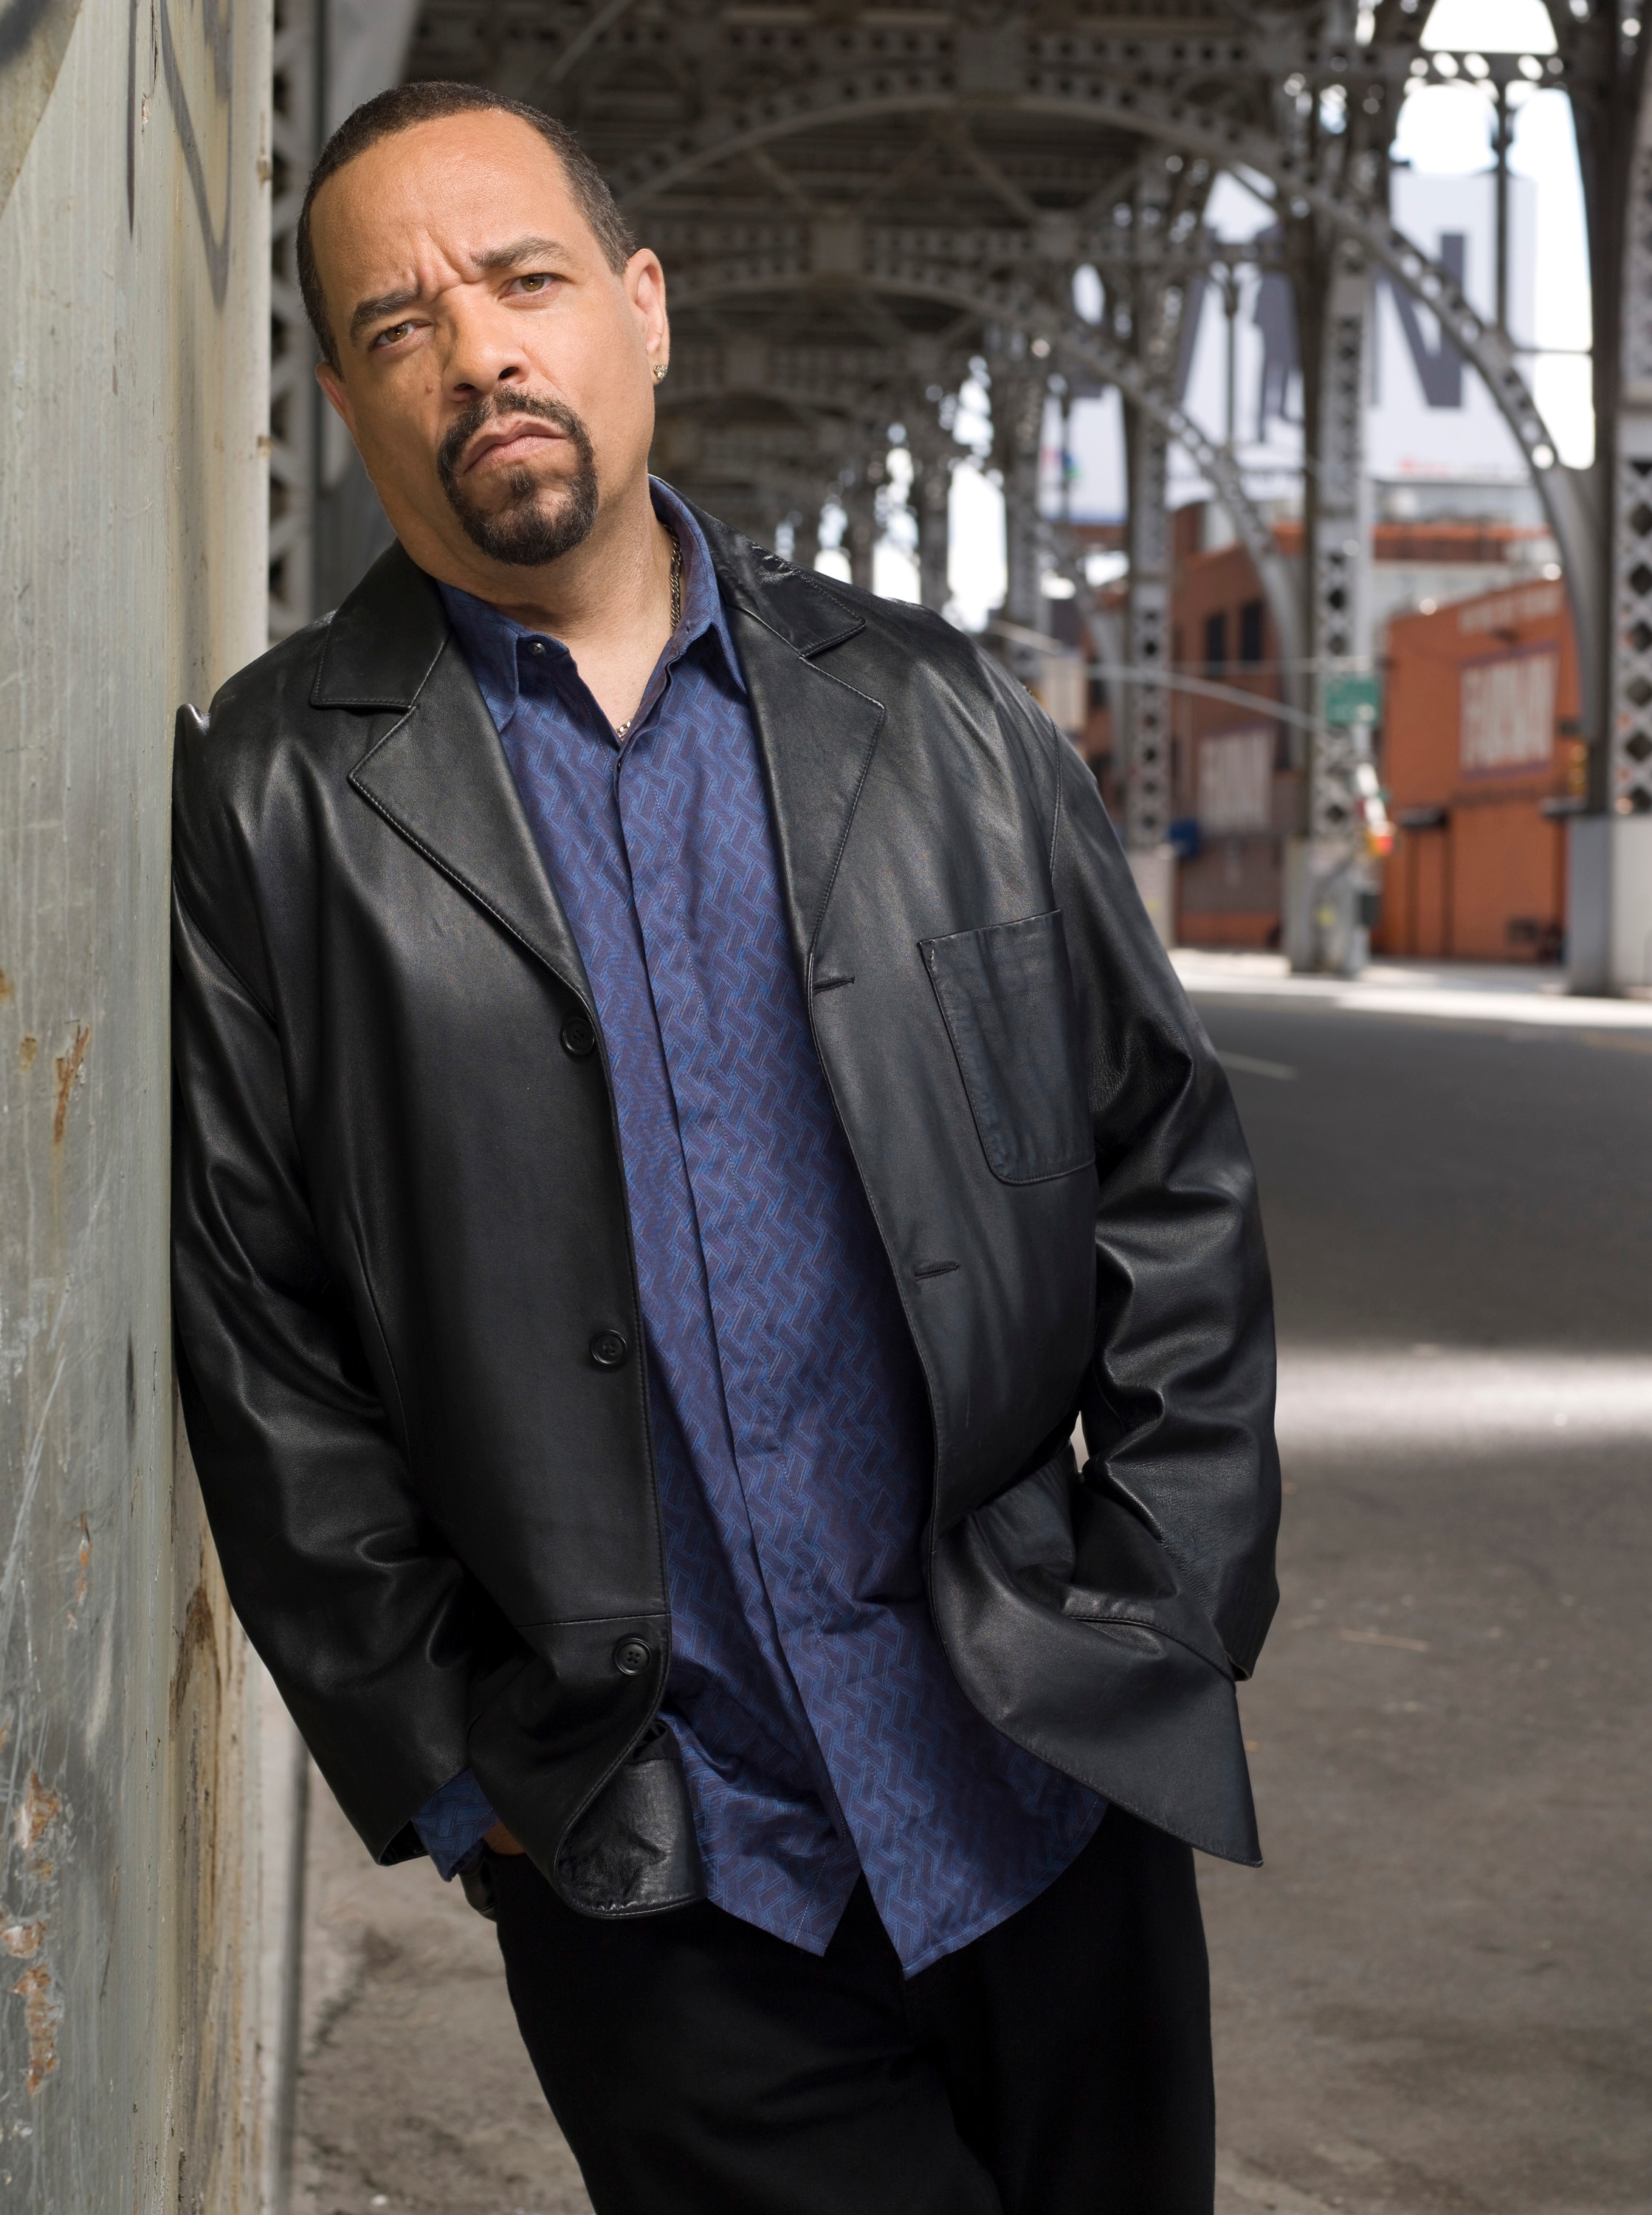 Law And Order Special Victims Unit Ice T Through The Years Photo 2081786